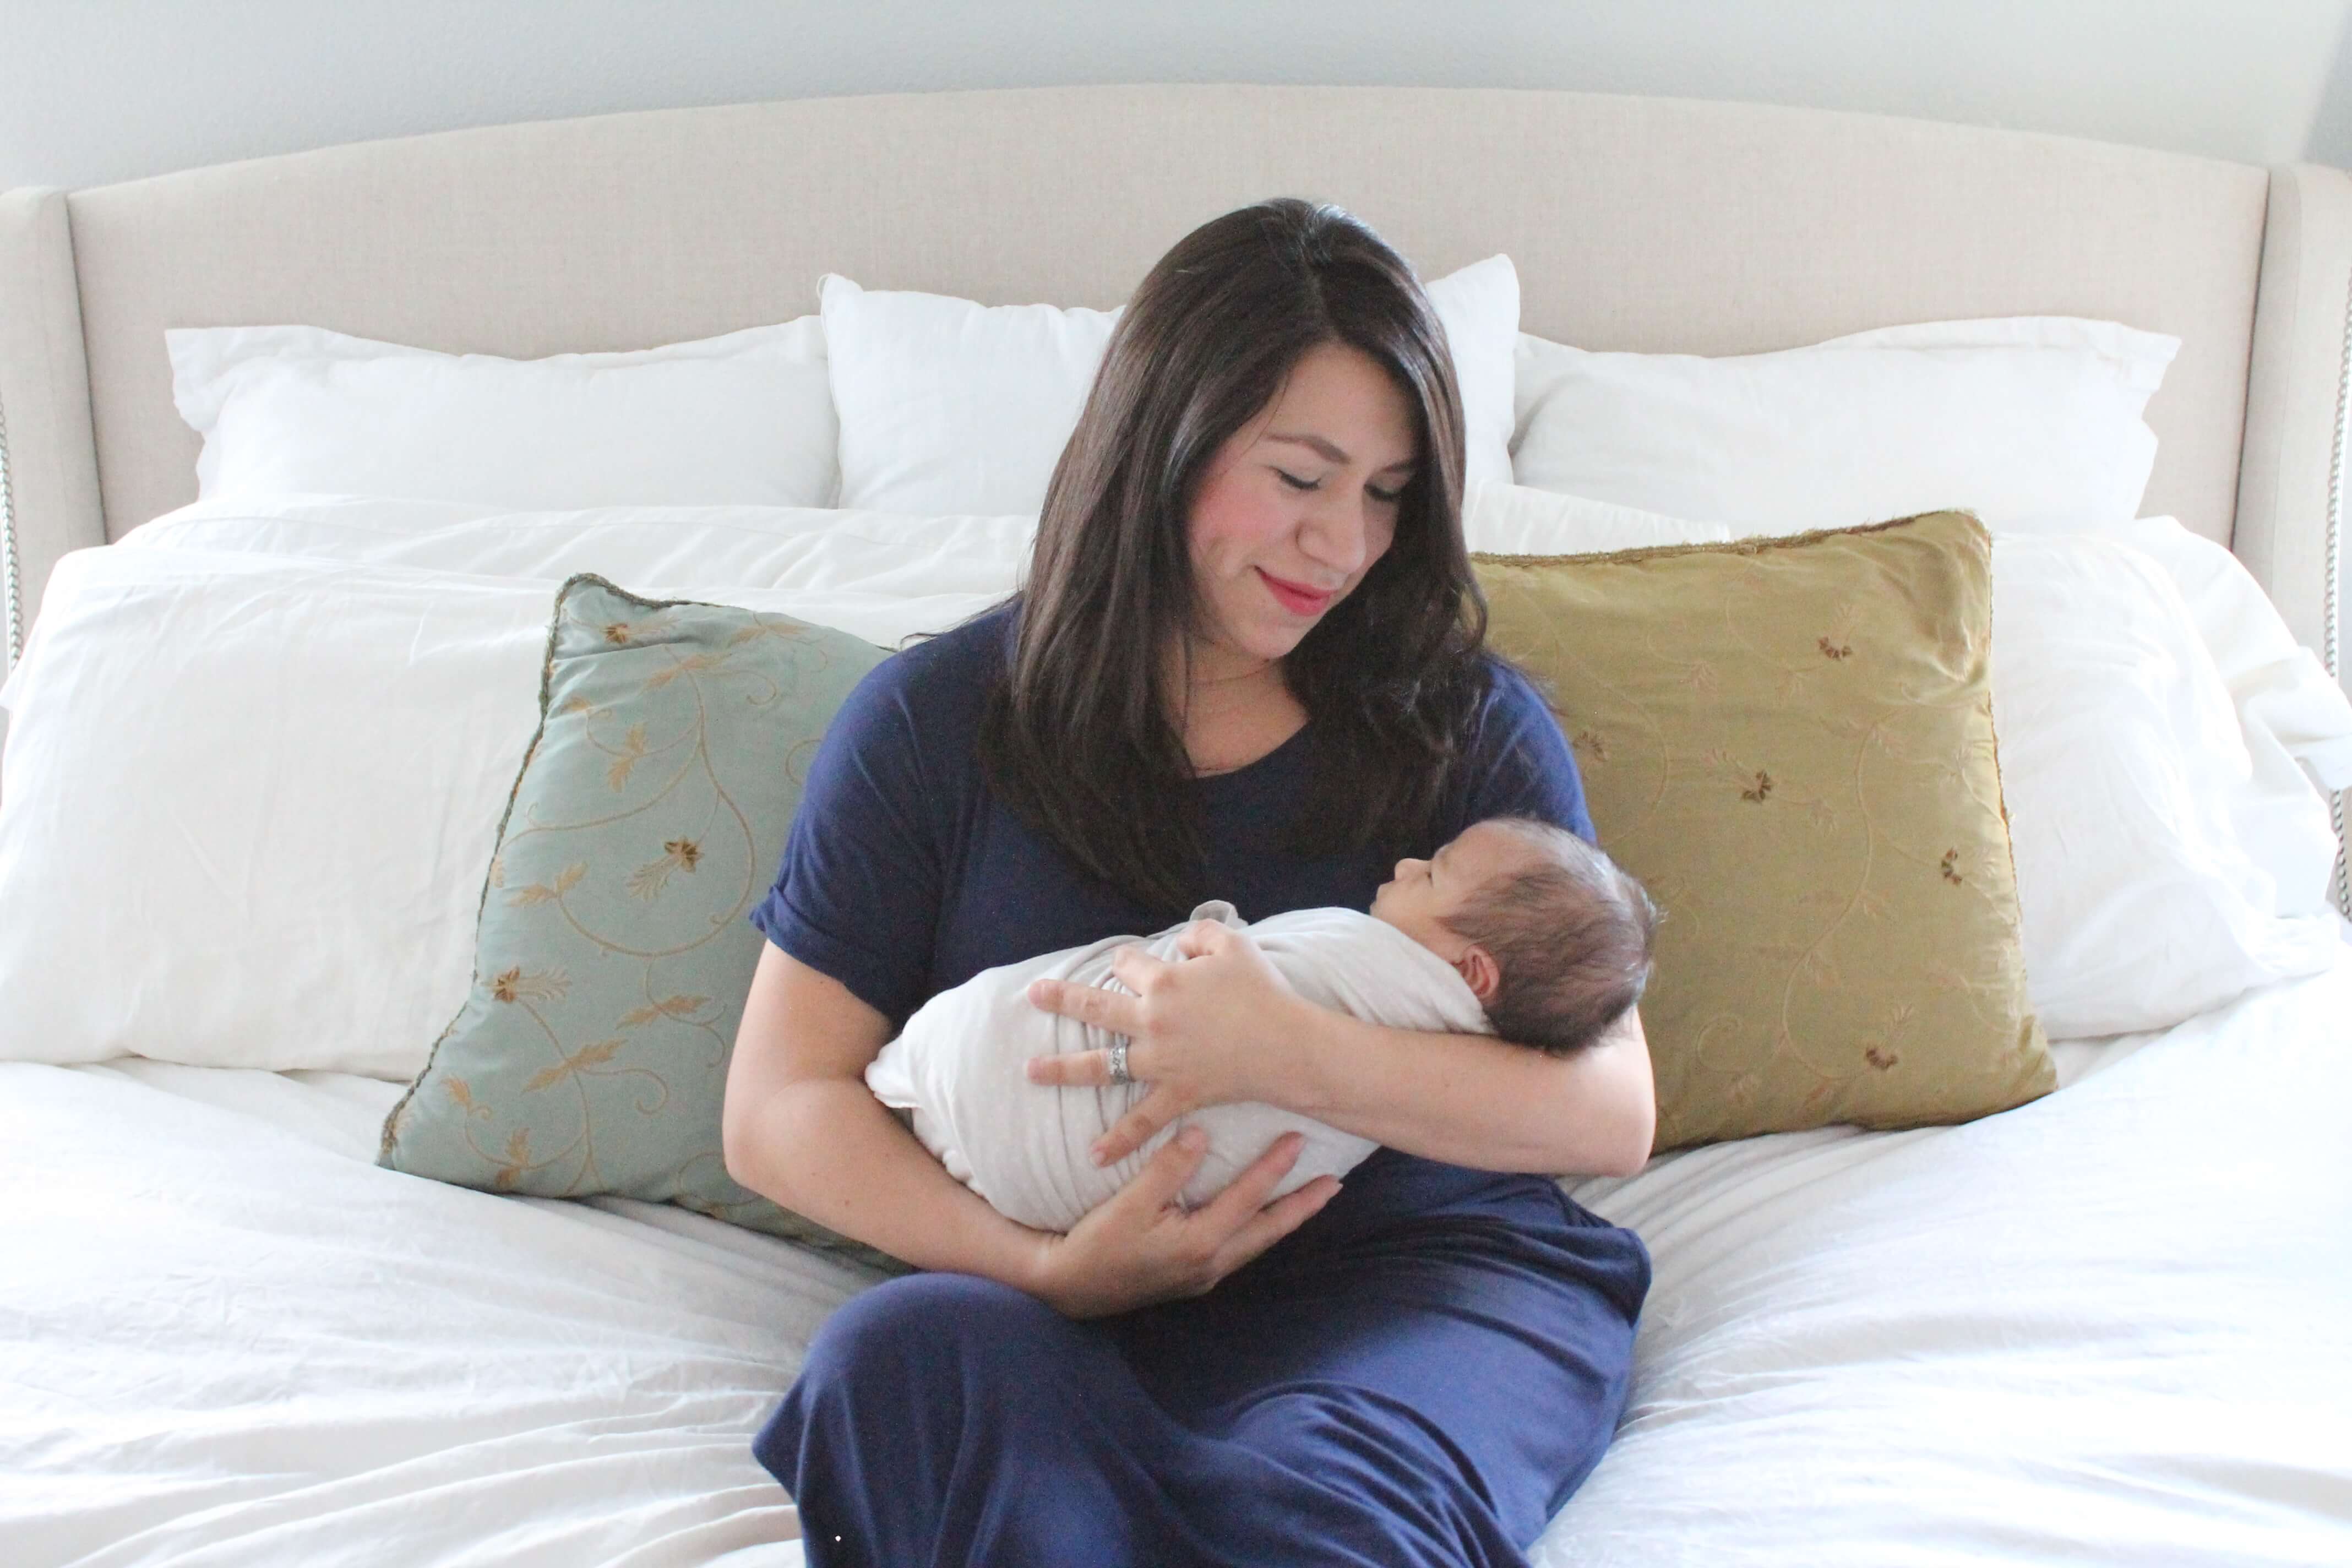 7 Ways to Ease New Mom Anxiety